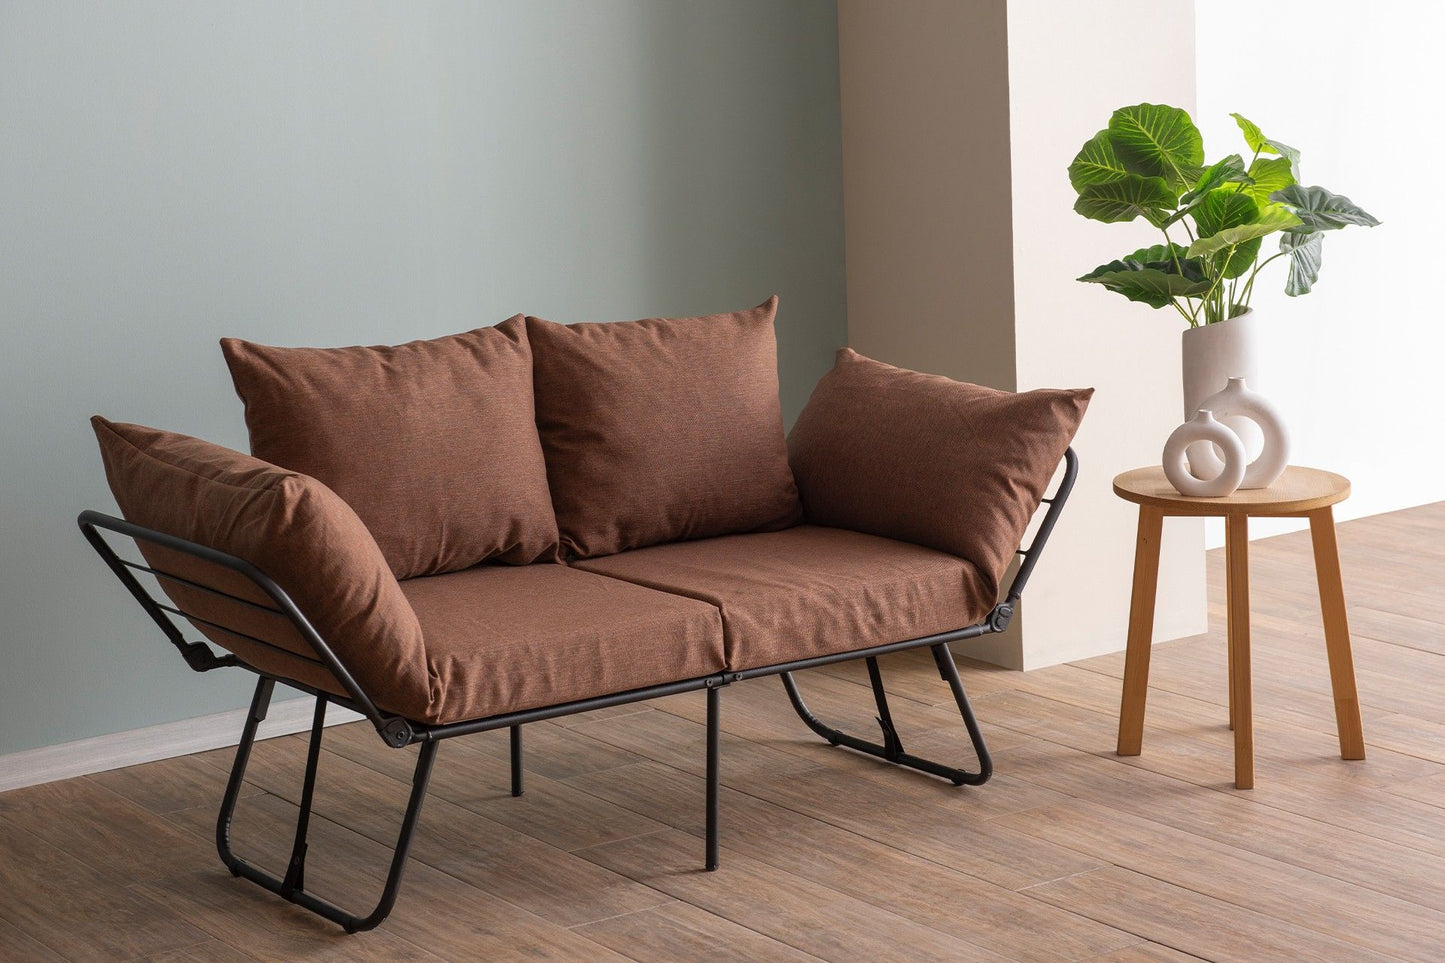 Viper 2-Seater - Light Brown - 2-Seat Sofa-Bed